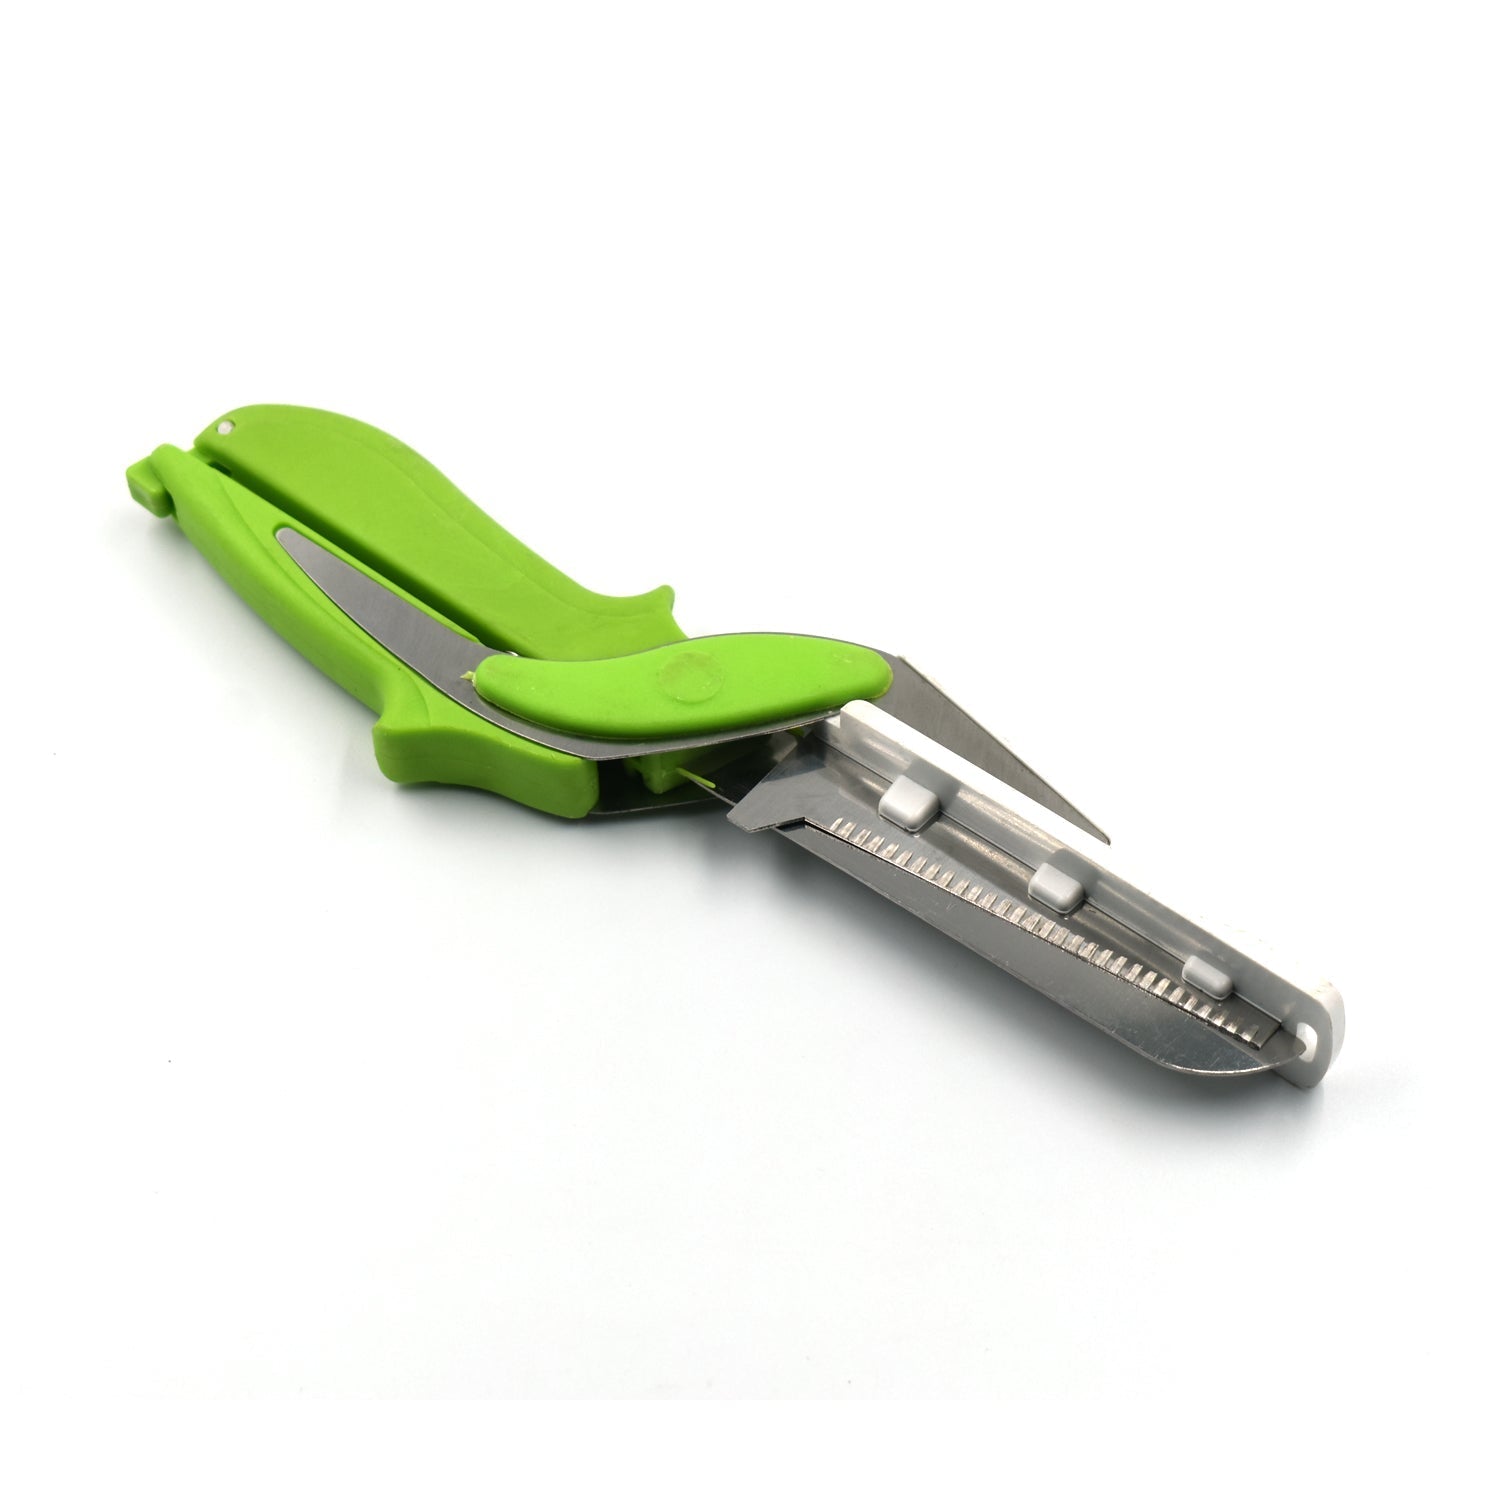 2666L  GREEN CLEVER CUTTER AND SHREDDER TOOL WITH EFFECTIVE SHARP CUTTING BLADE SYSTEM. DeoDap